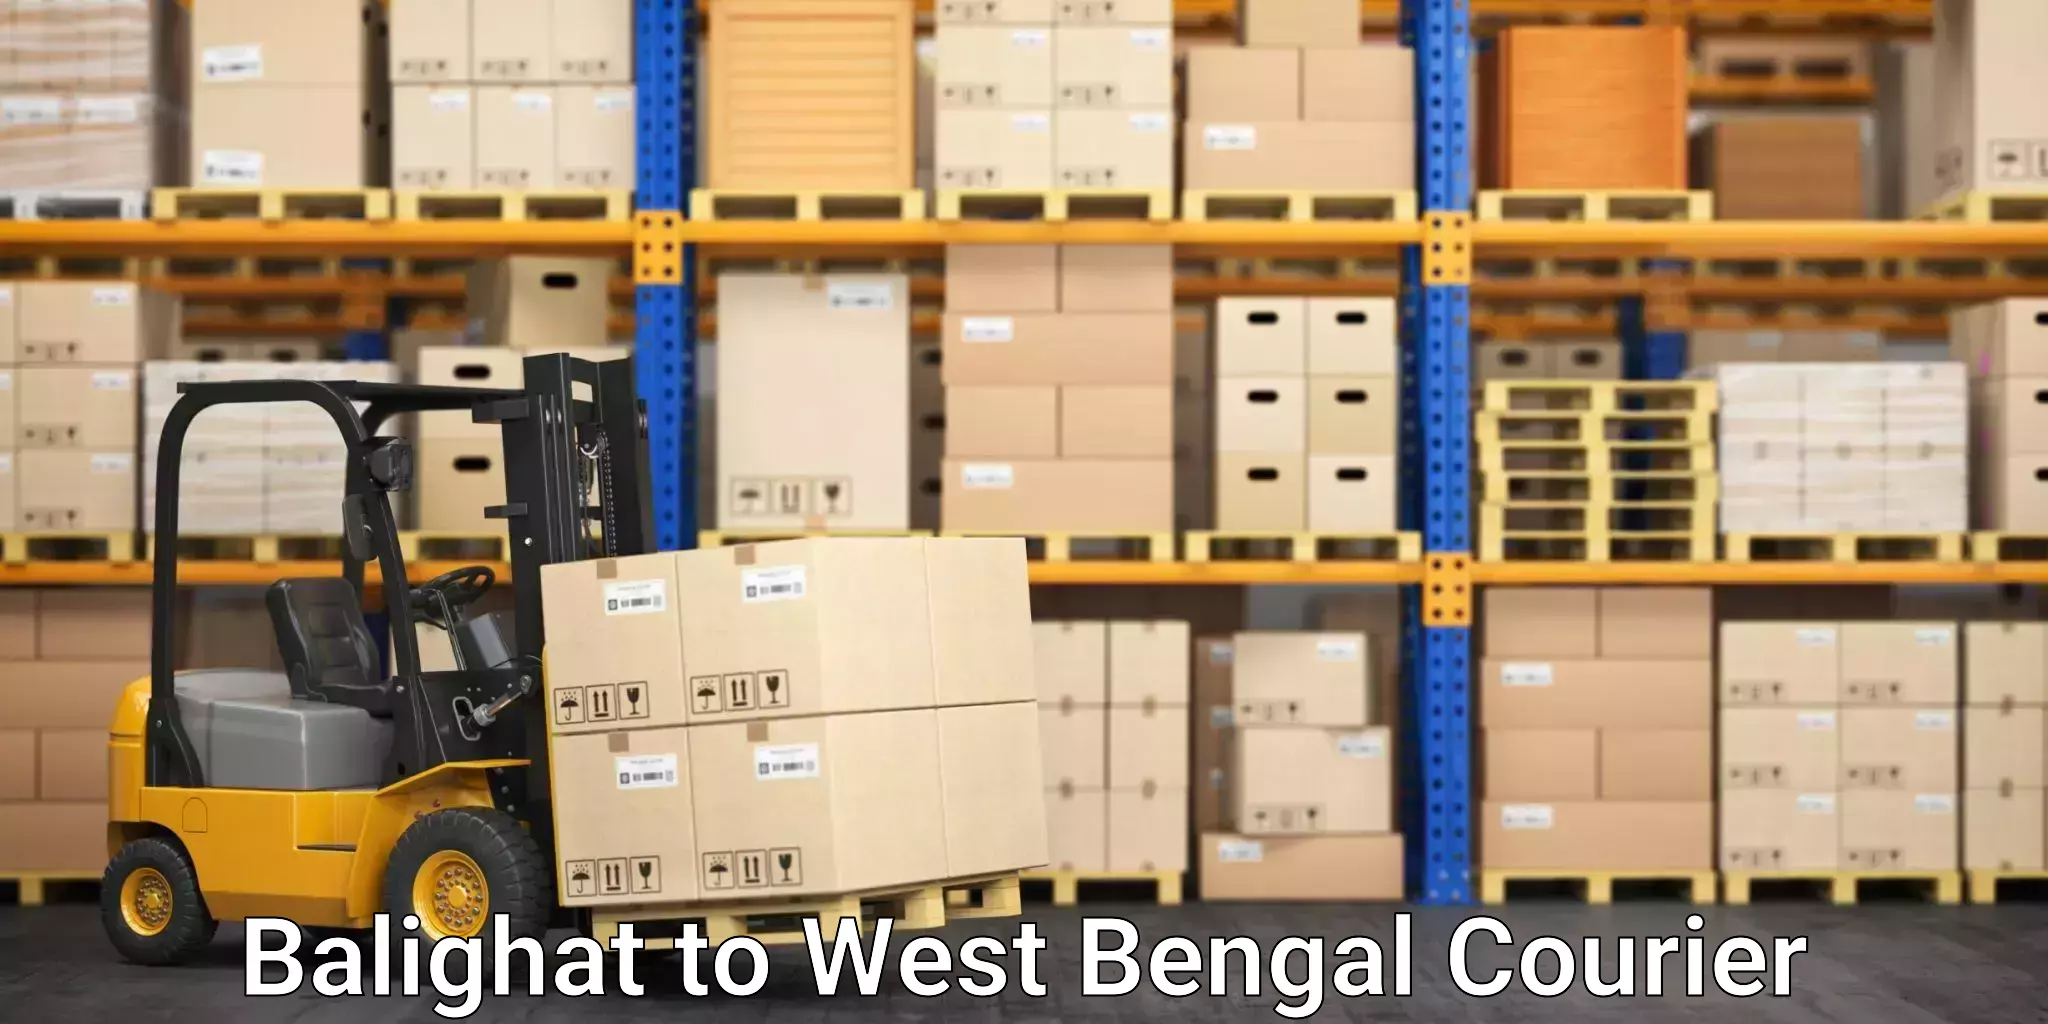 Retail shipping solutions Balighat to West Bengal